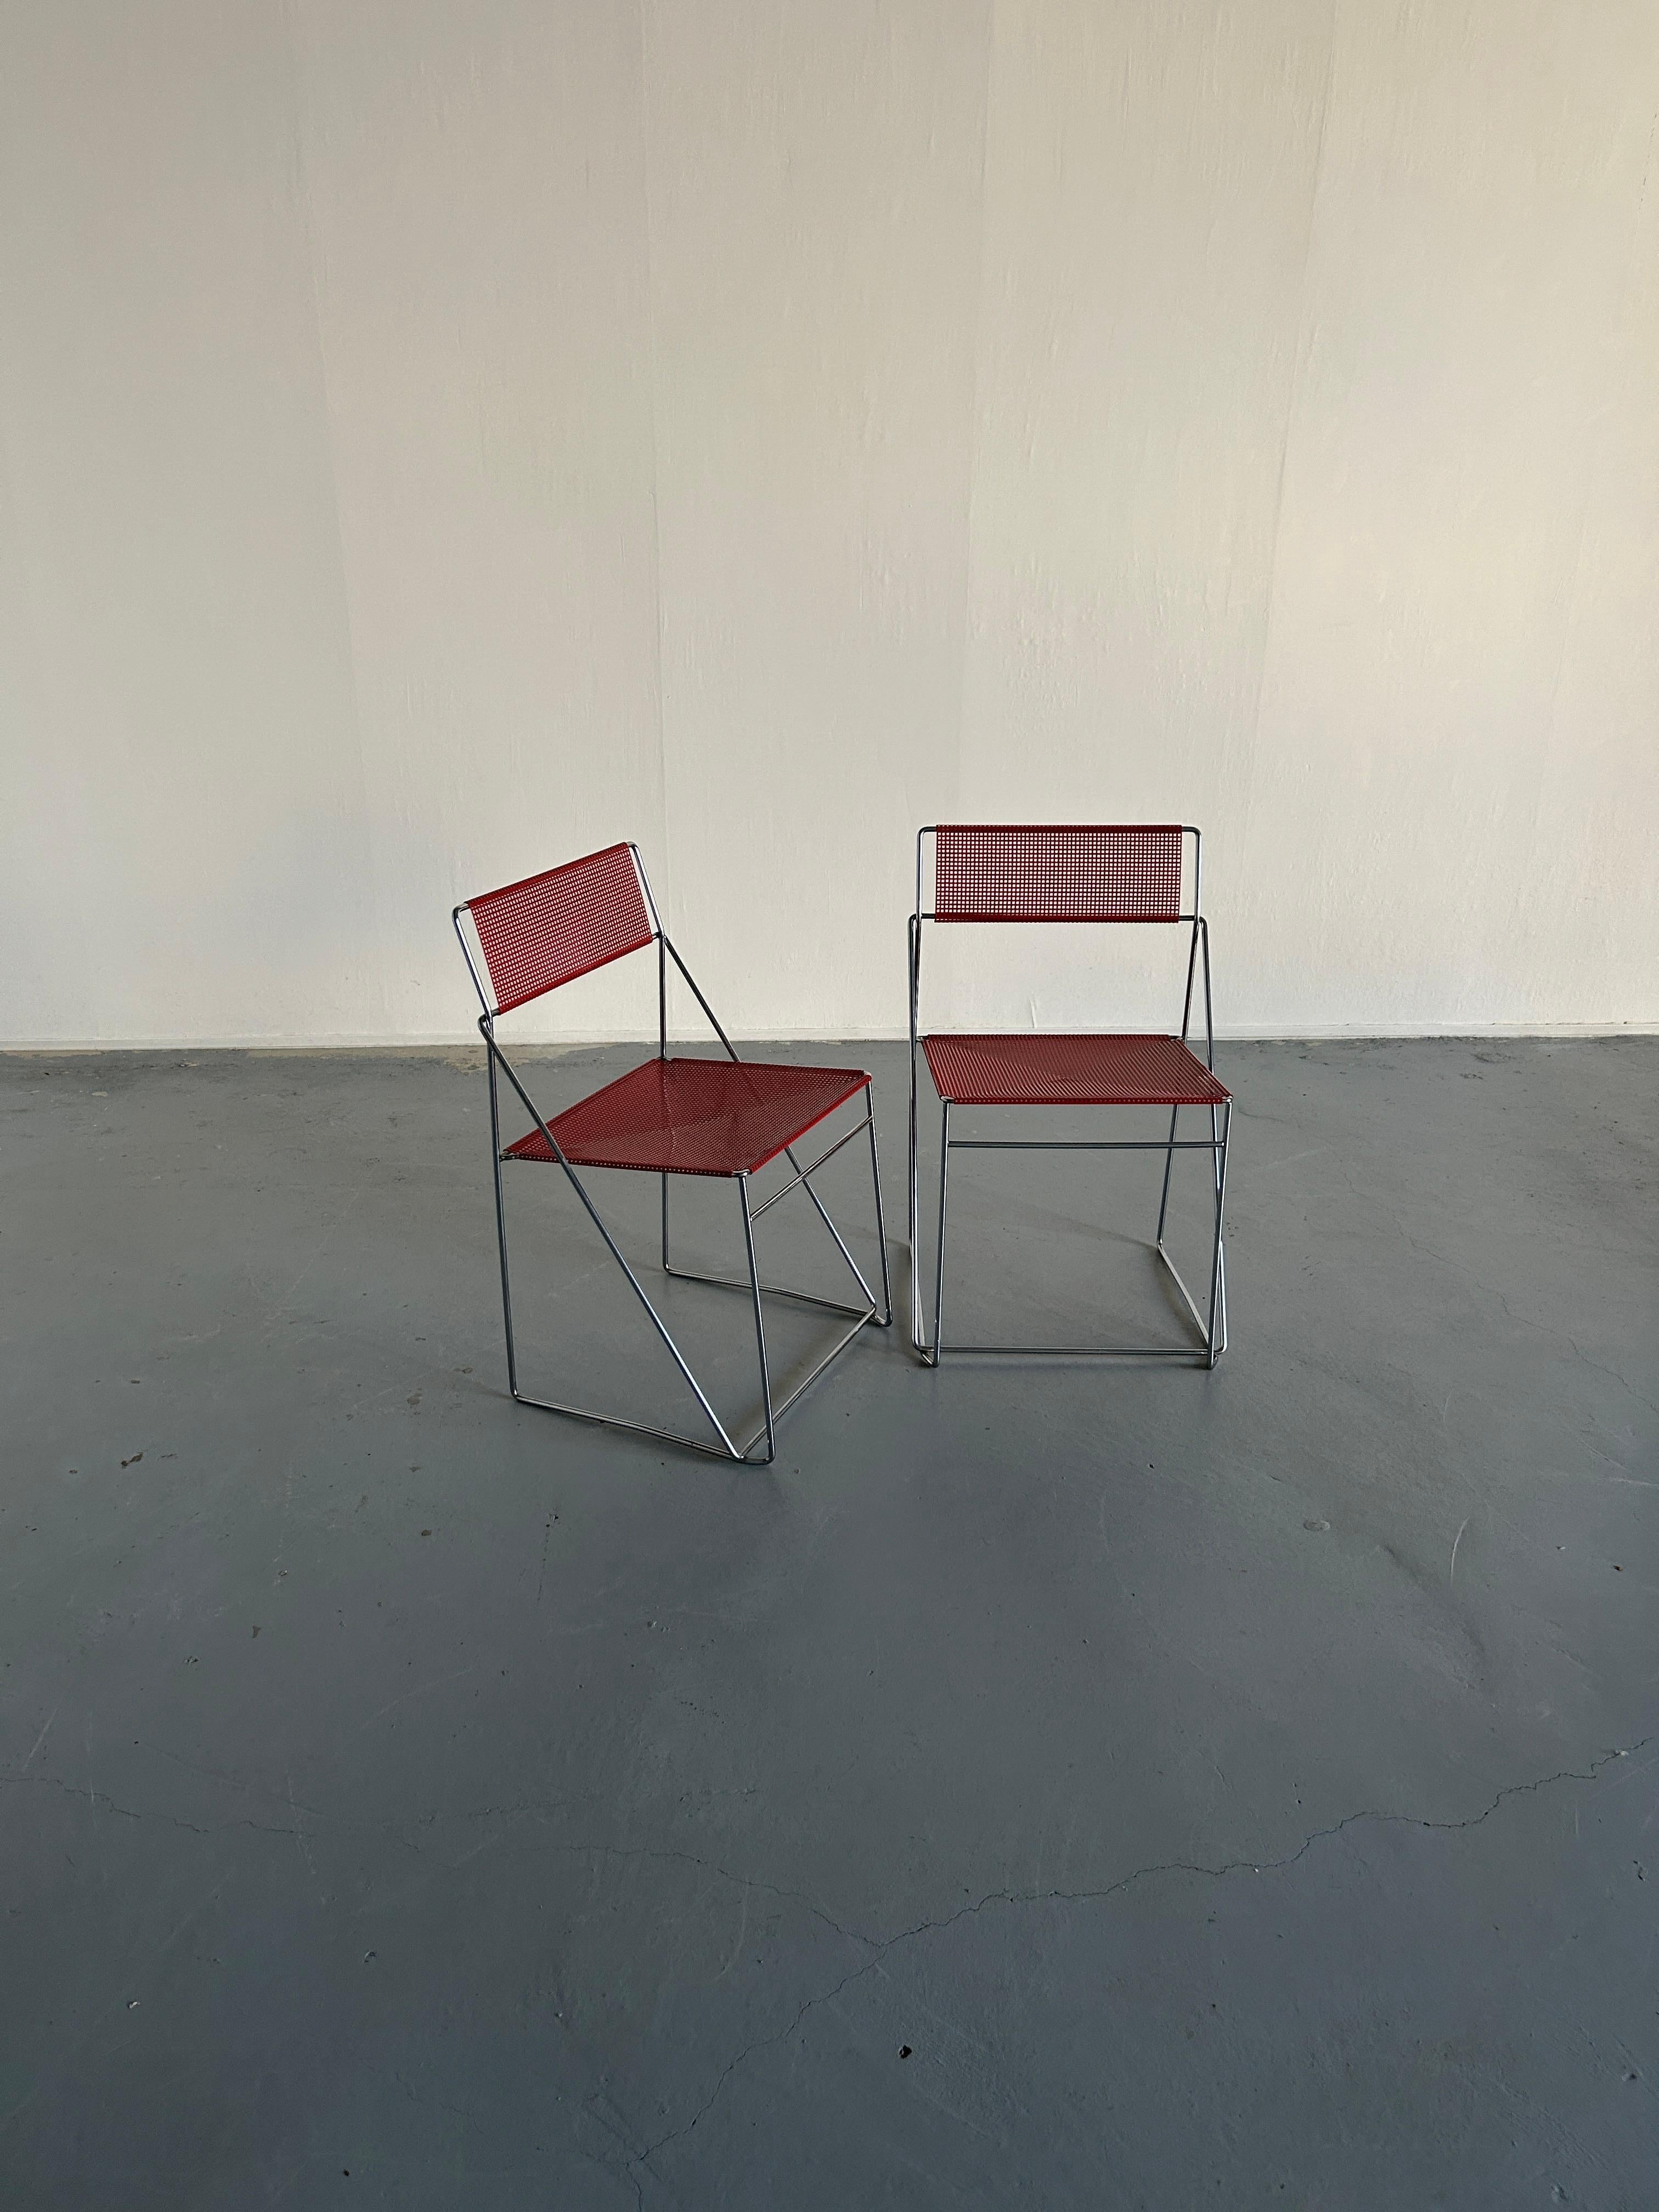 Pair of minimalist postmoderns X-Line chairs designed by Niels Jorgen Haugesen for for Bent Krogh, Denmark.
Made of chrome plated steel rods and red enamelled perforated steel backs and seats.
Stackable. 

In very good vintage condition with